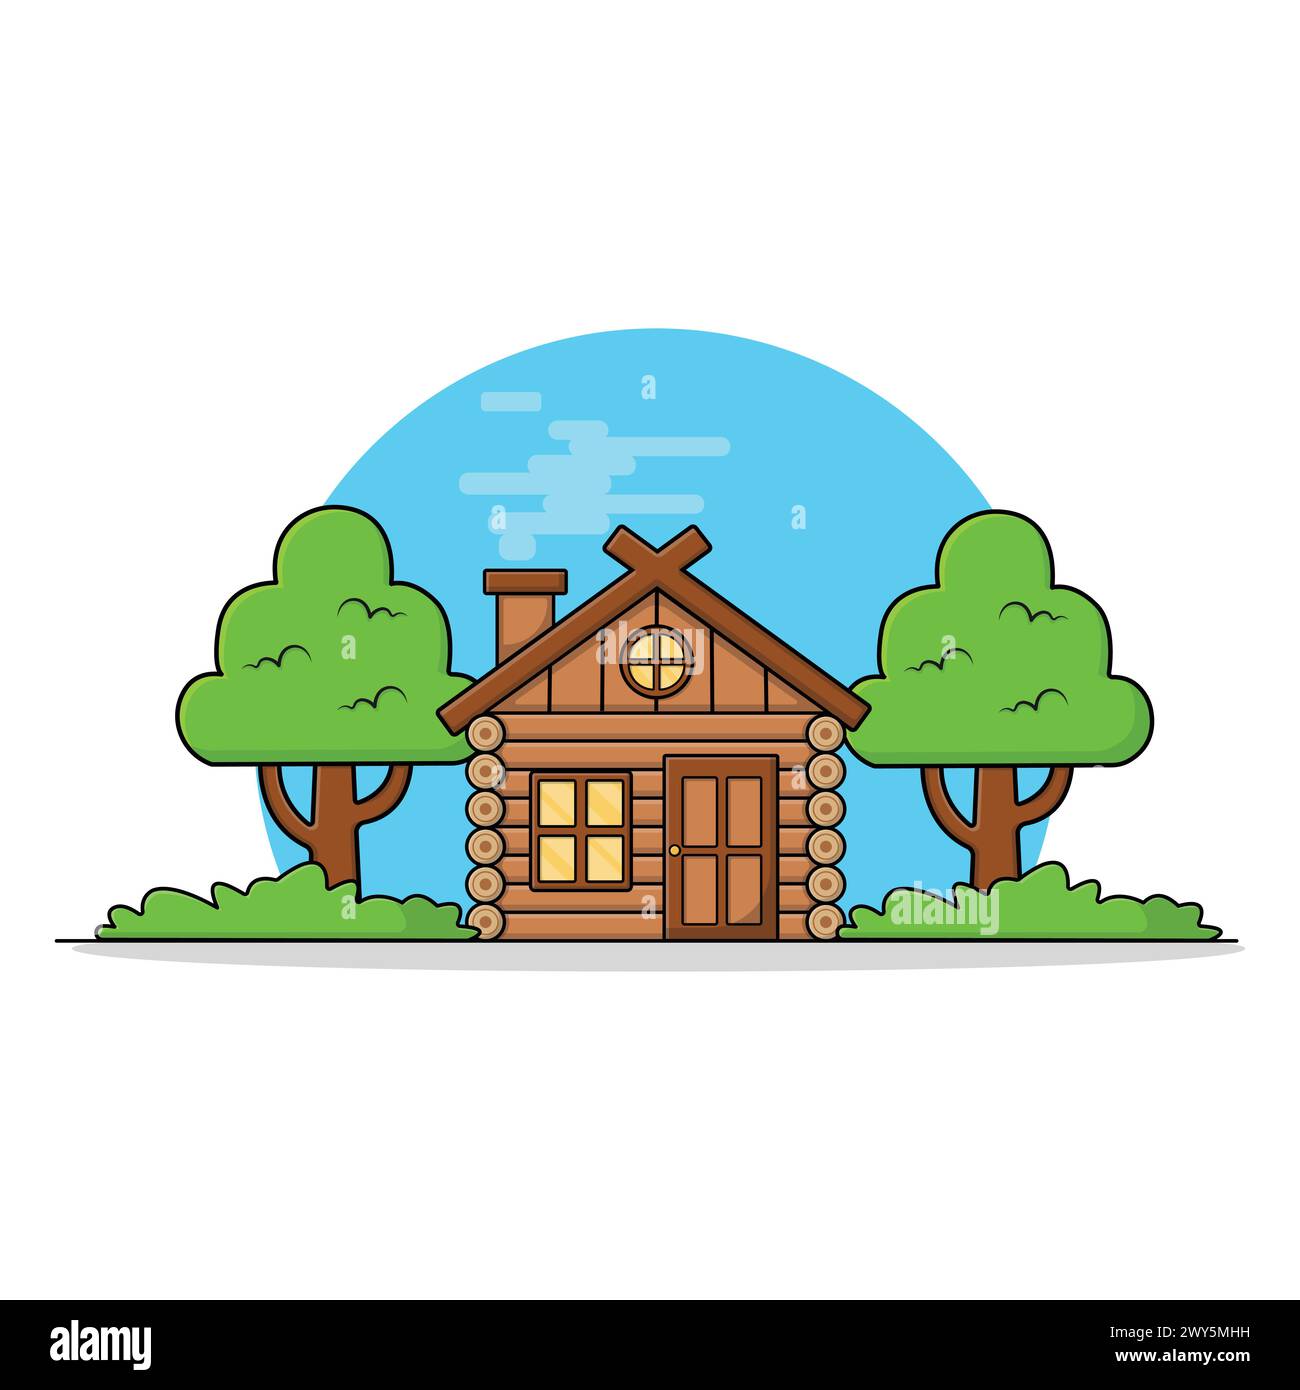 Wooden Forest Hut with Green Trees Vector Illustration Stock Vector